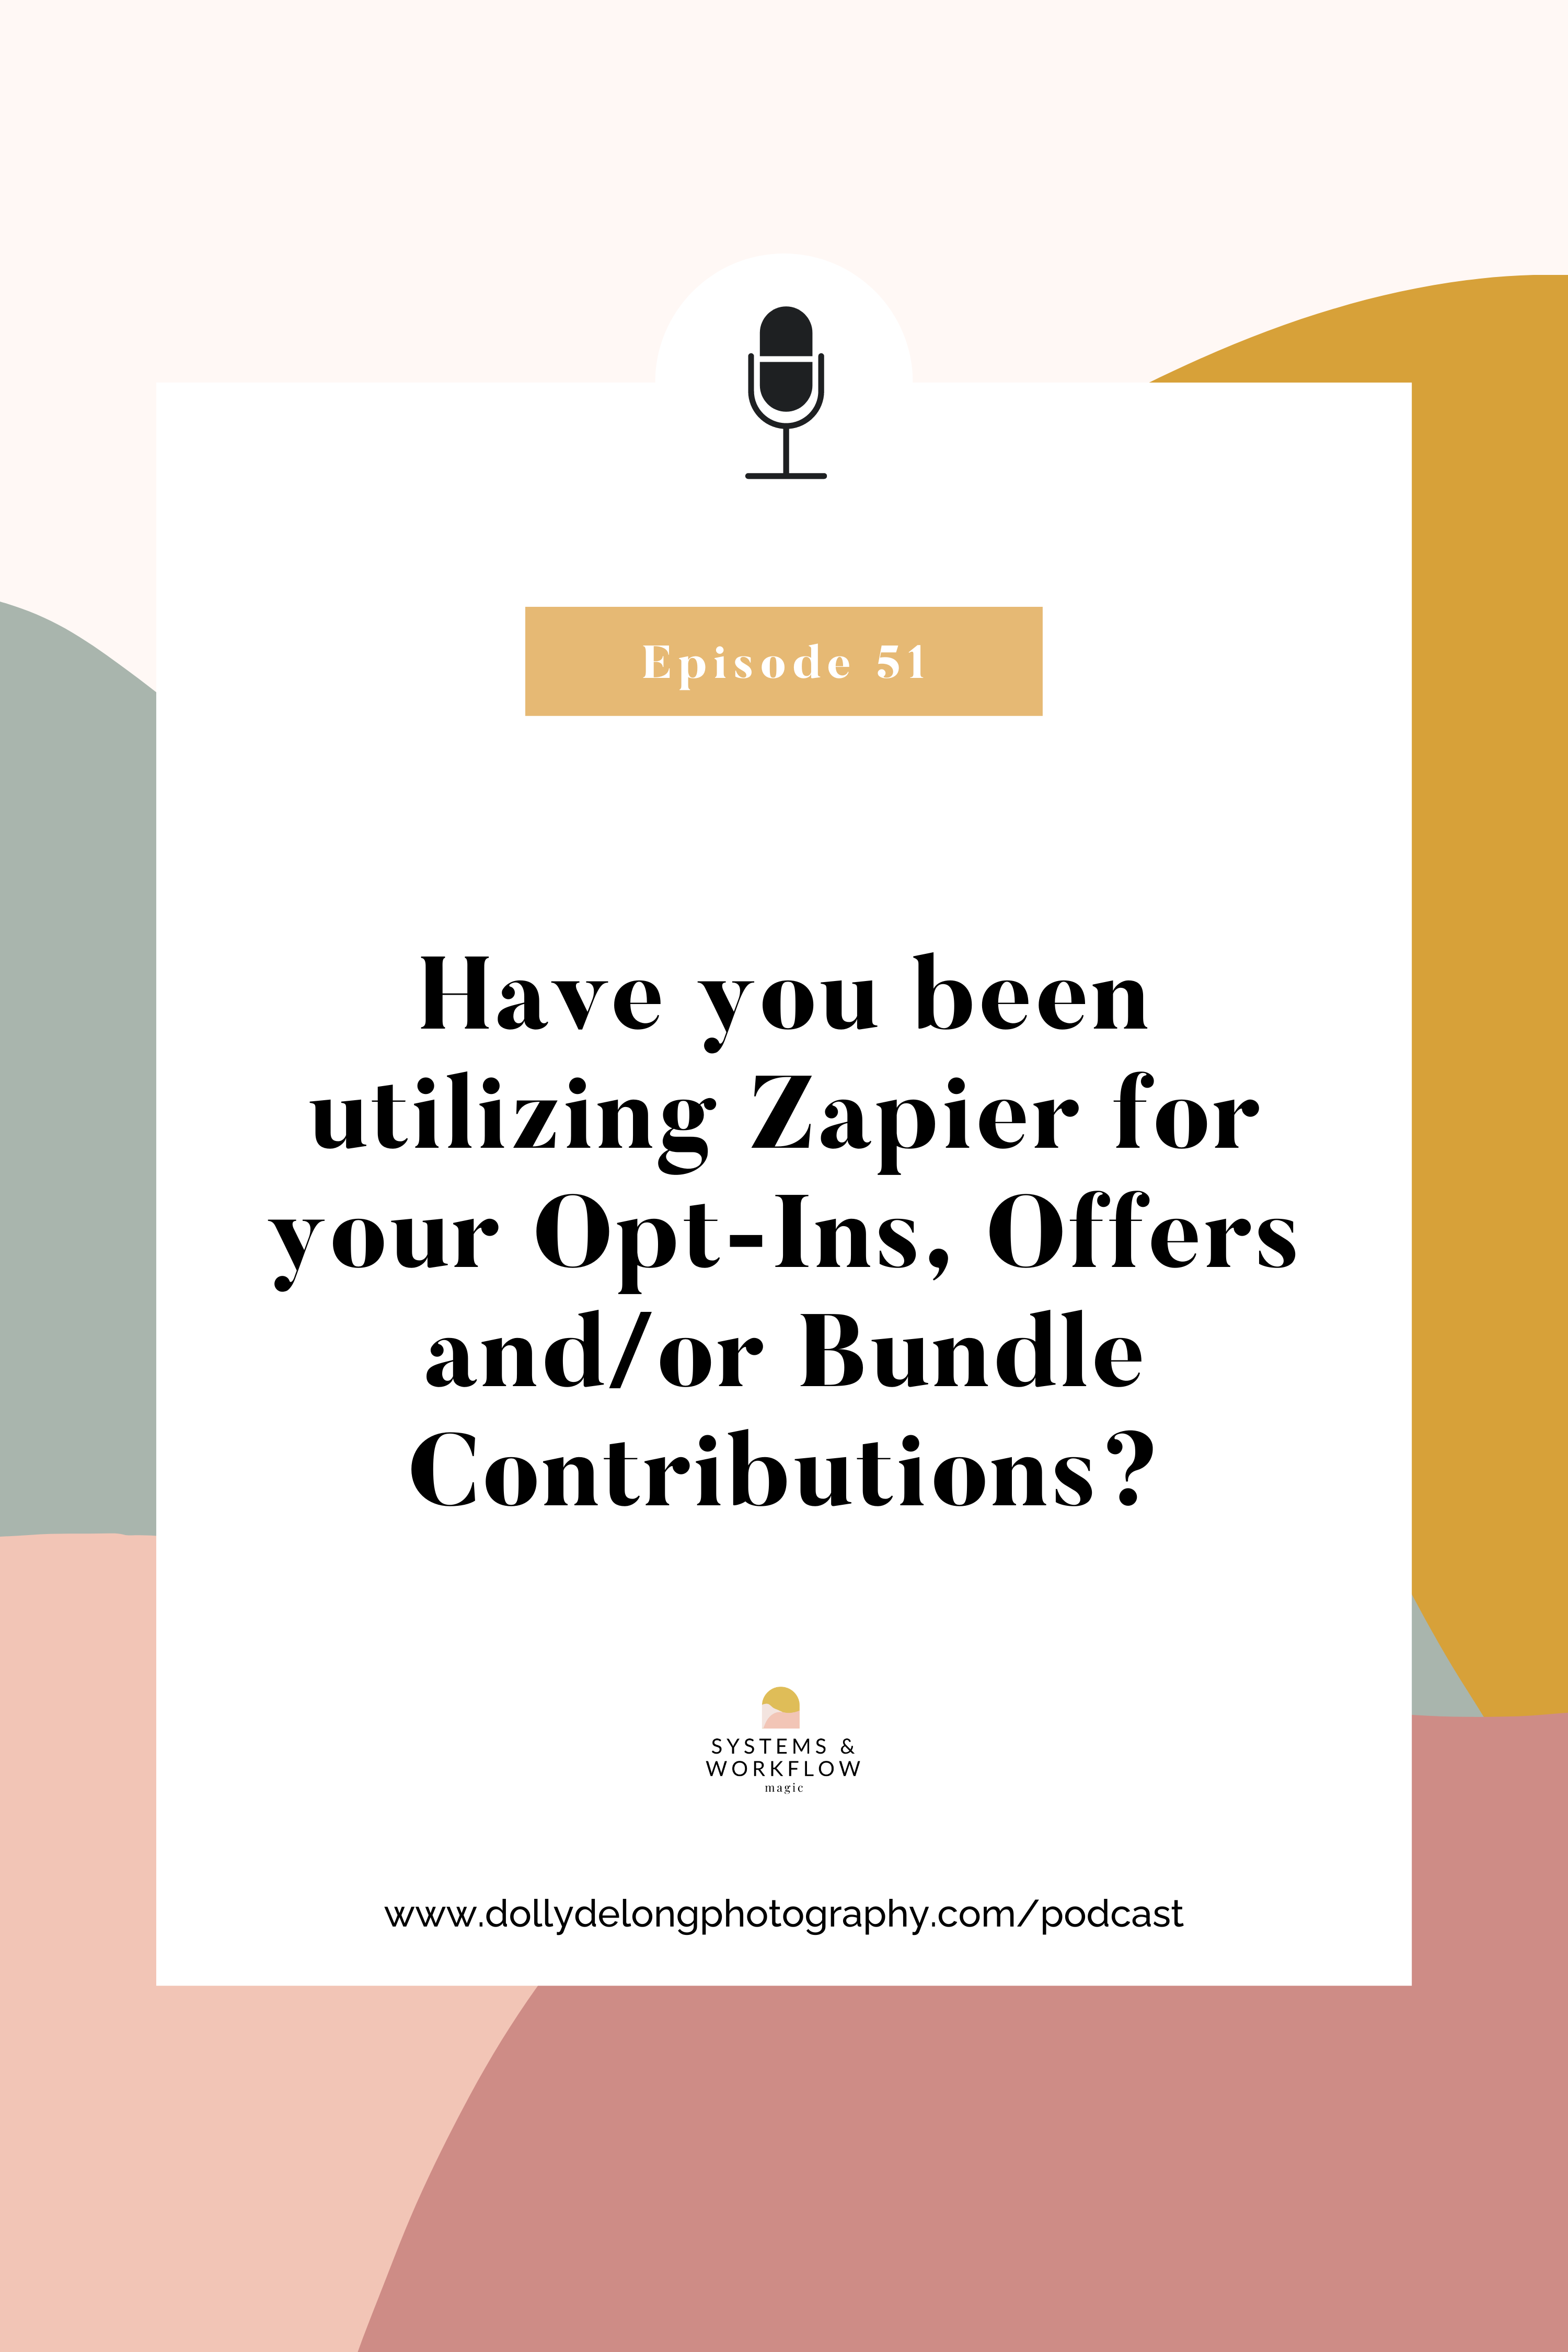 51: Week 8 of the series How to Automate & Streamline the Backend of your Lead Magnets (and Offers) - All about Zapier